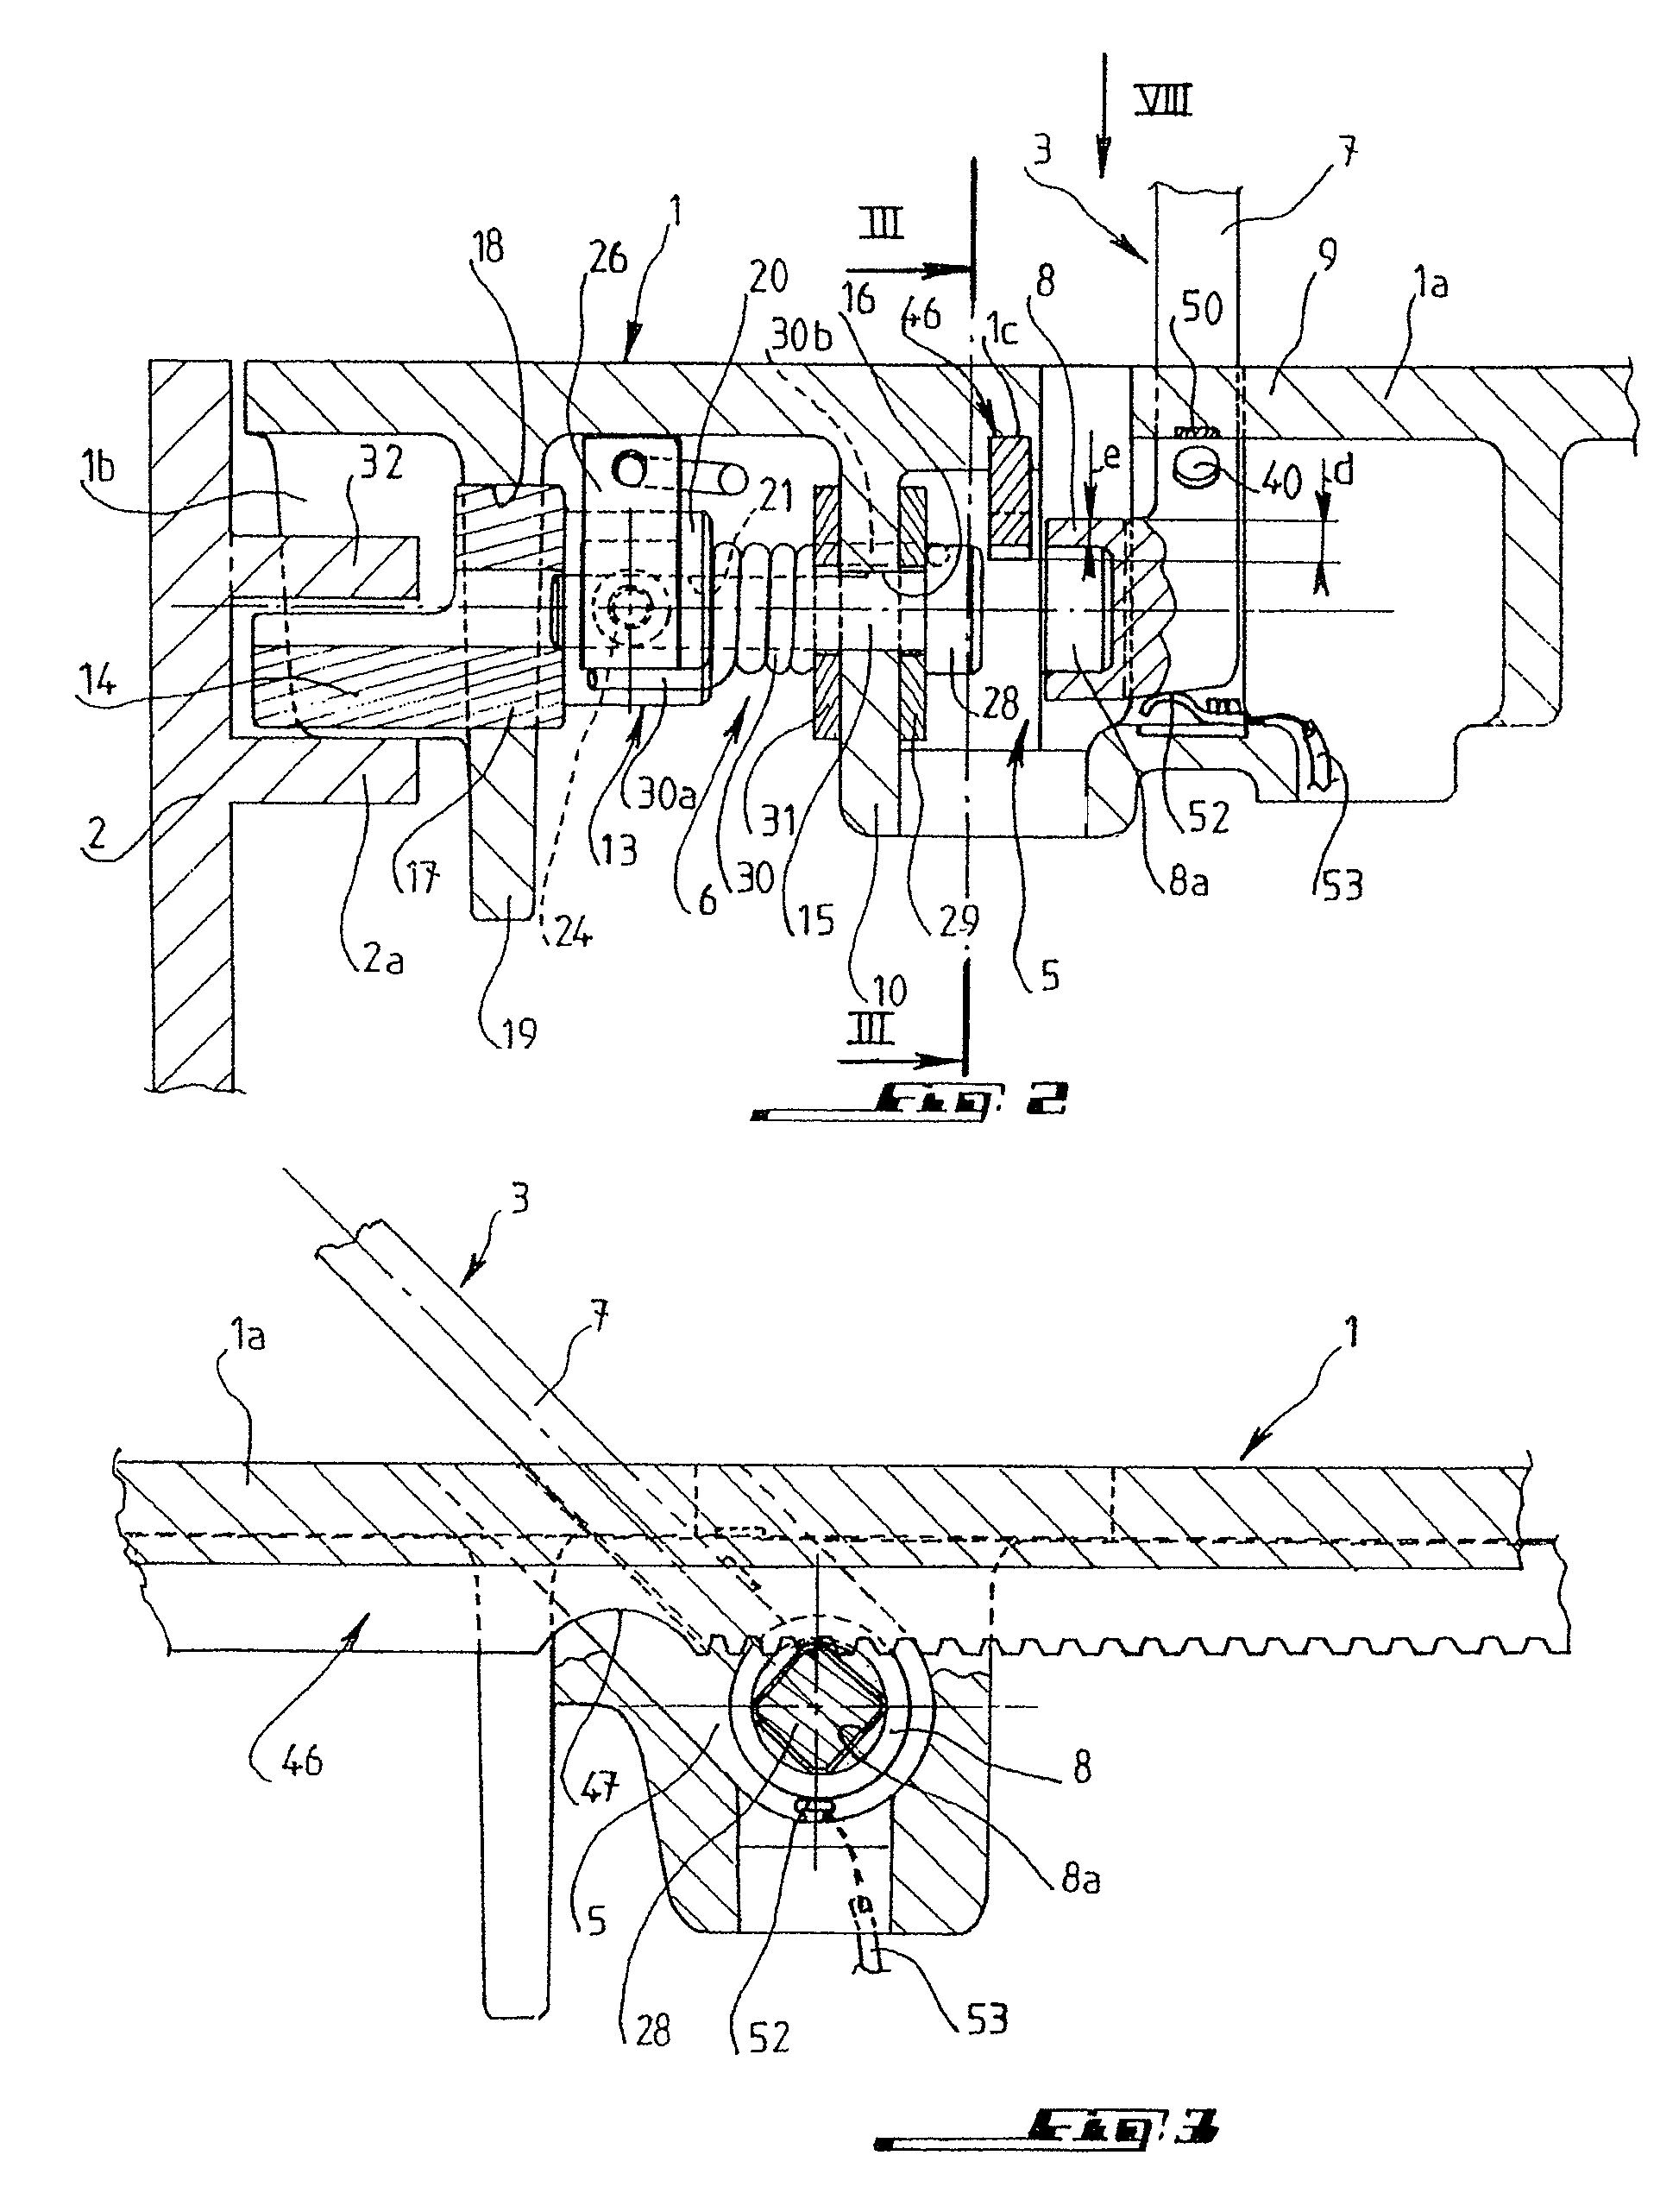 Device for locking and unlocking a plug on a frame using a wrench